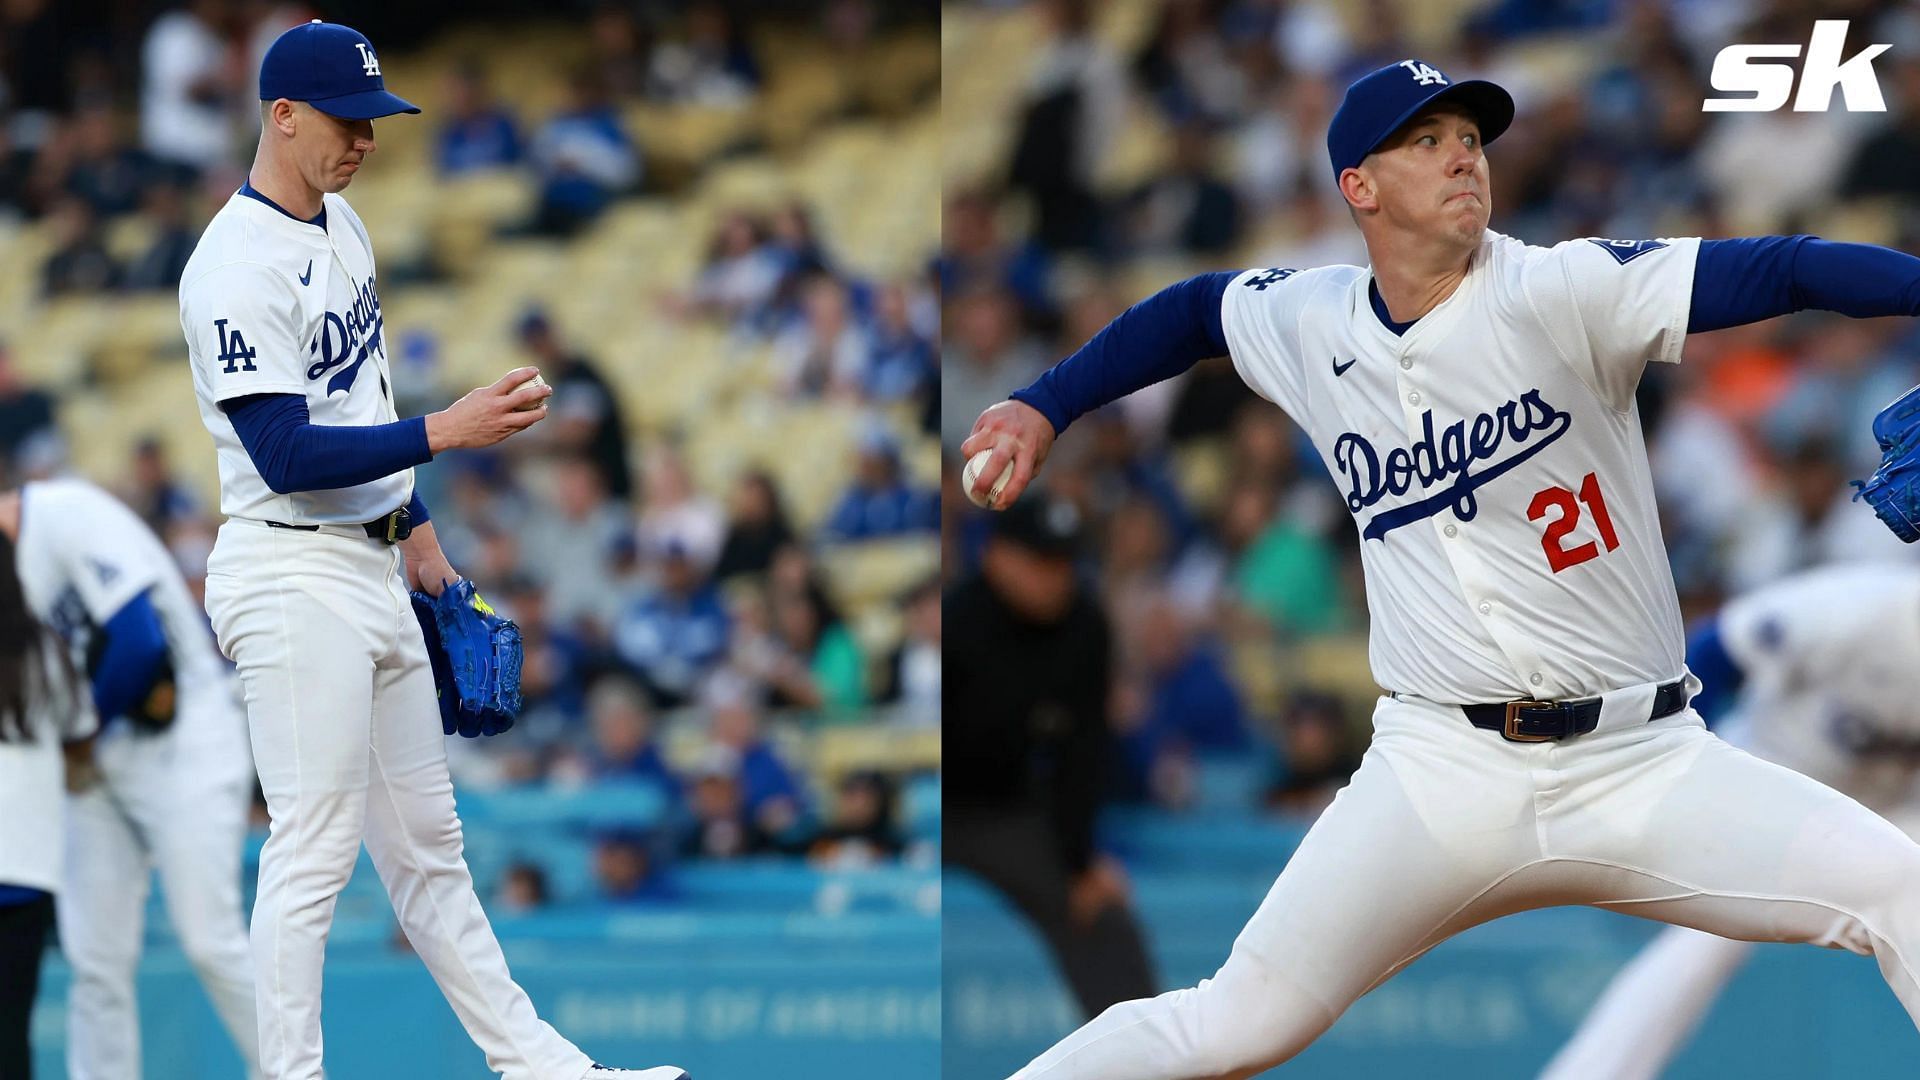 Walker Buehler is a must-start pitcher moving forward in fantasy baseball leagues